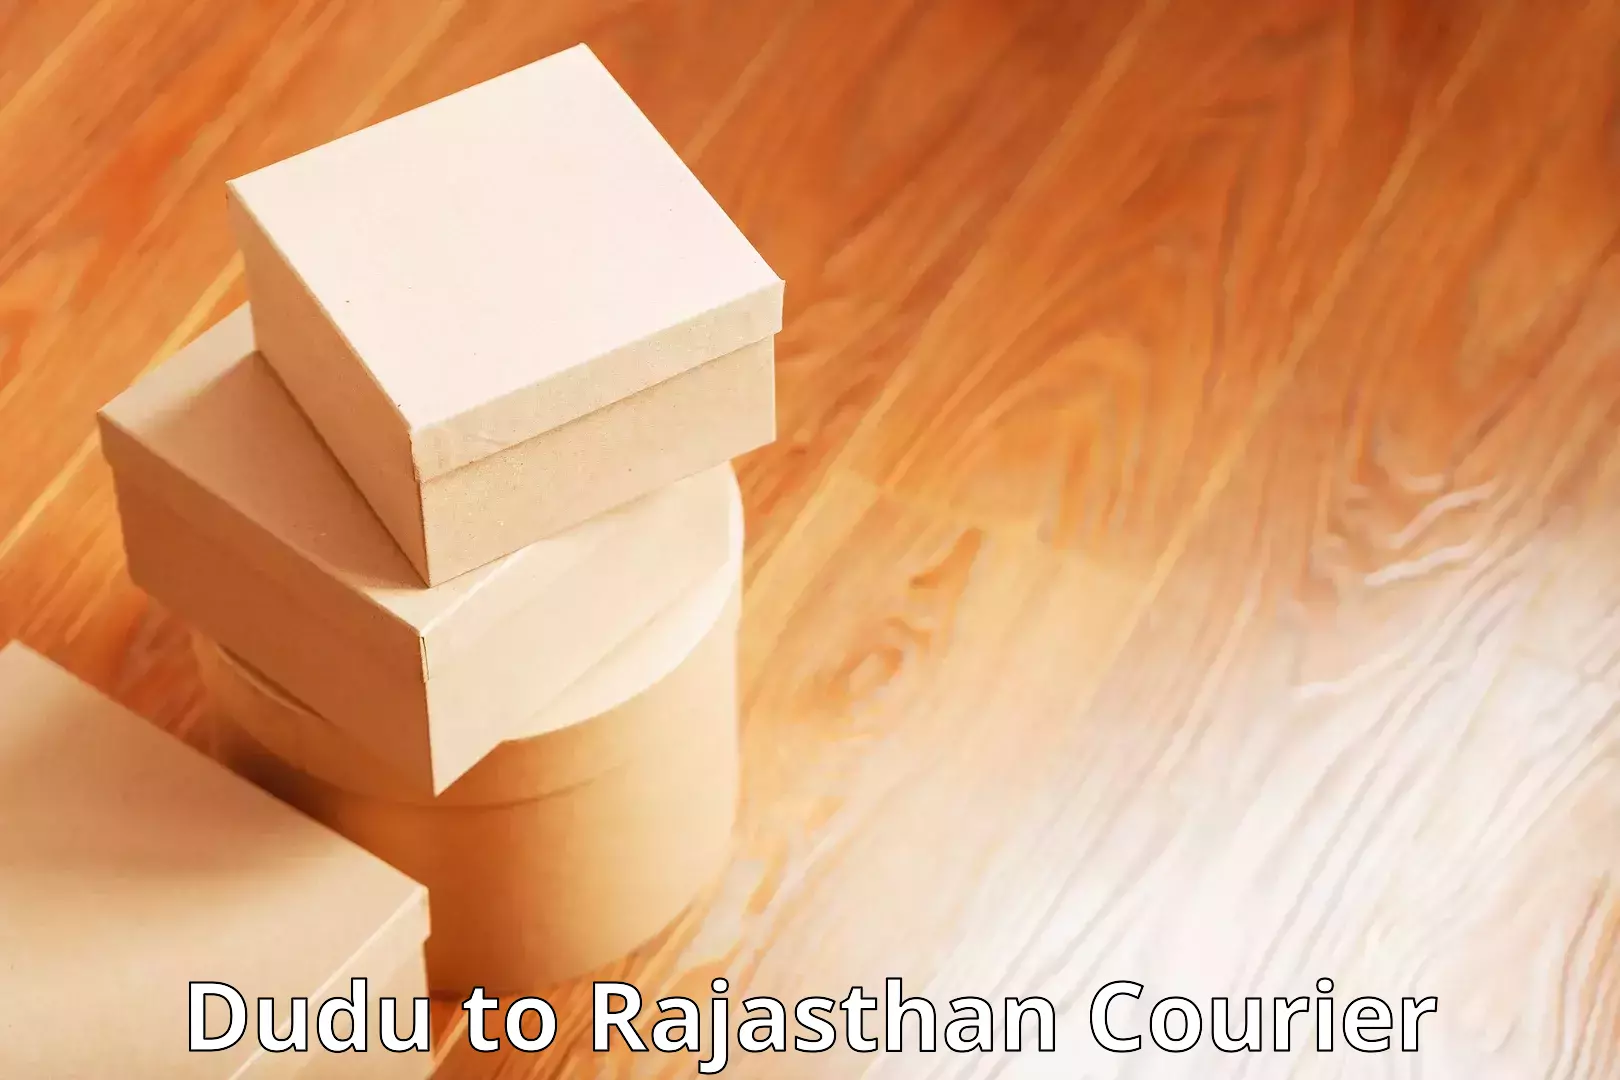 User-friendly delivery service Dudu to Rajasthan